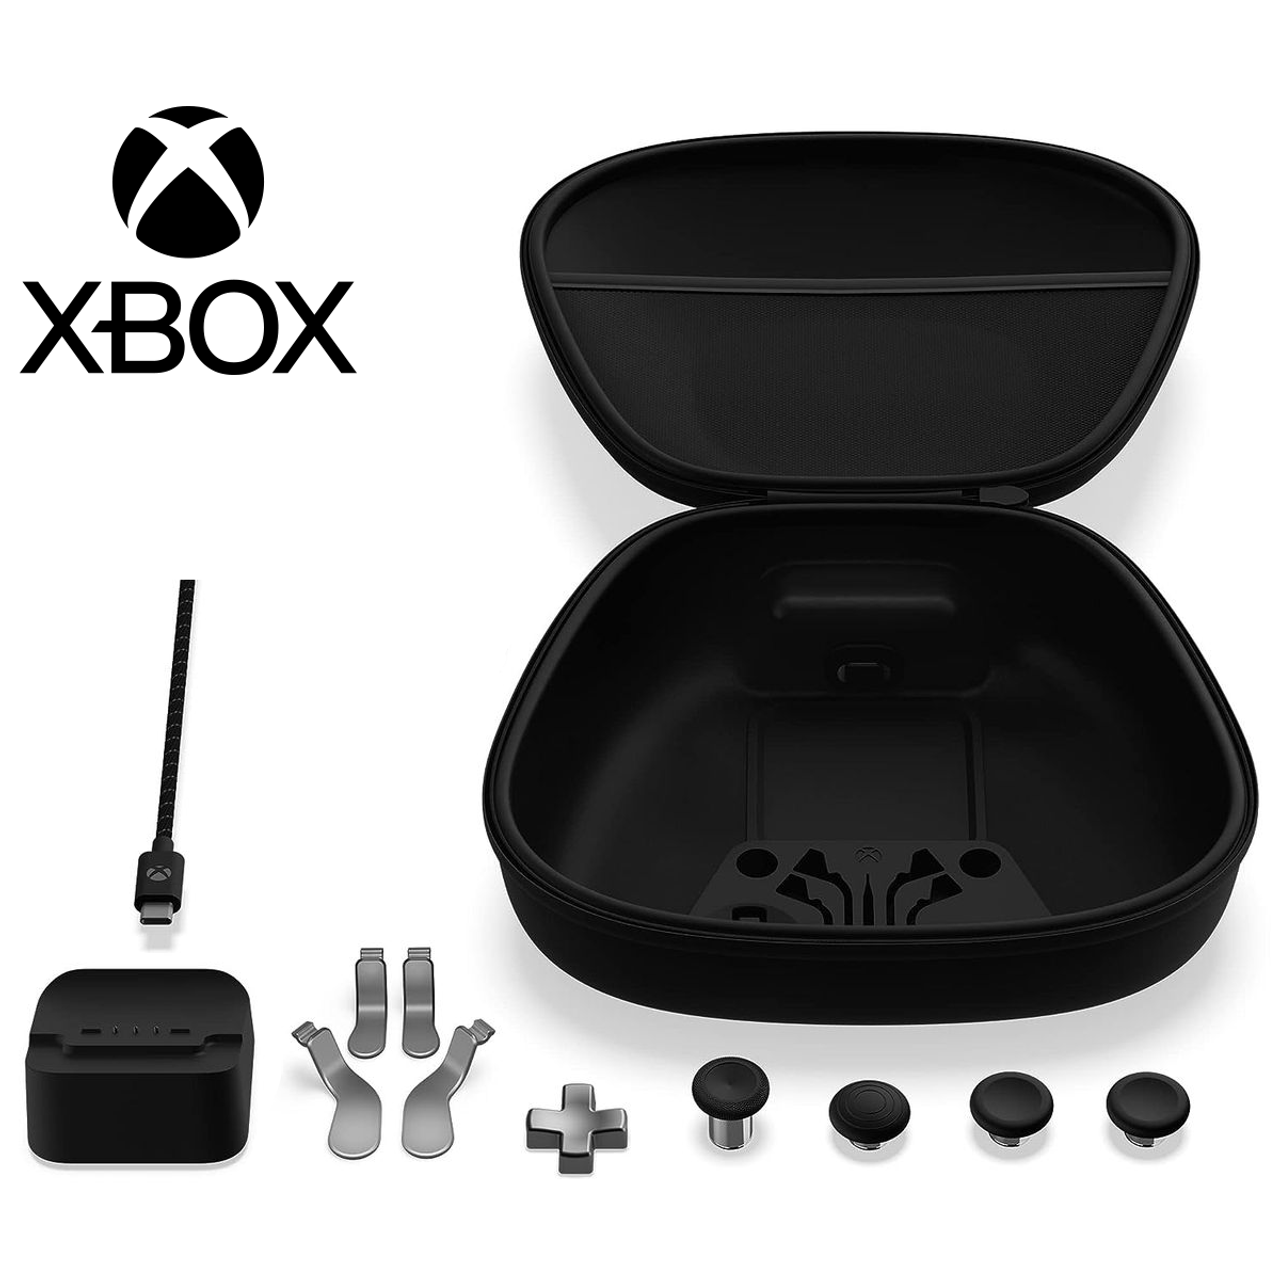 Xbox® Complete Component Pack for Elite Series 2 Controller product image